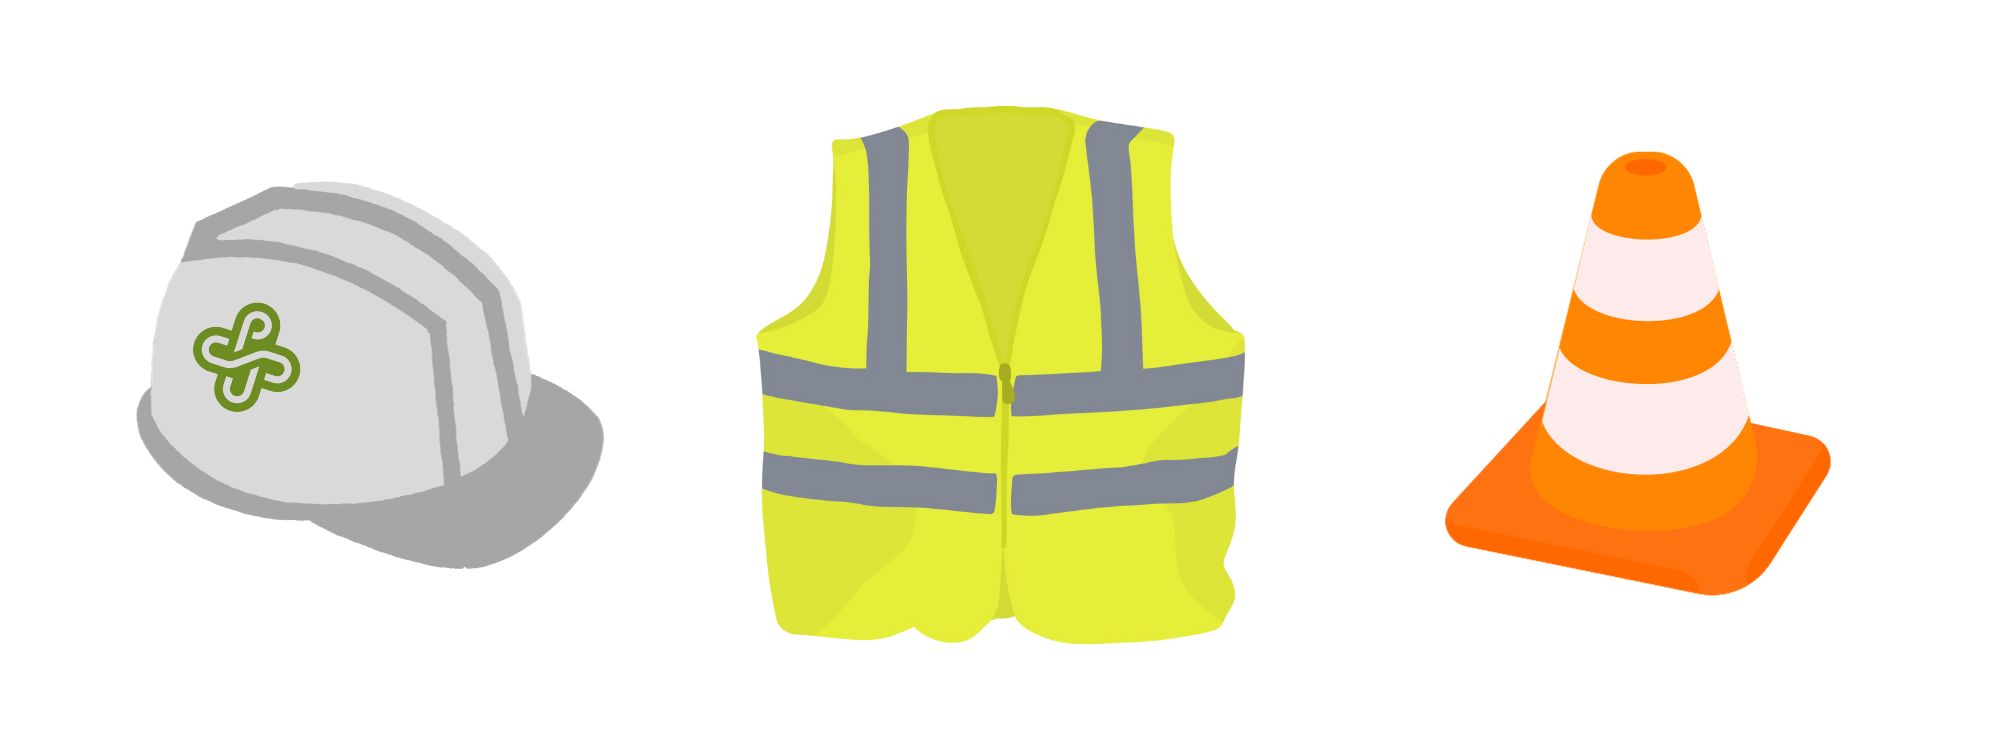 Clip art of a hard hat, safety vest, and construction cone